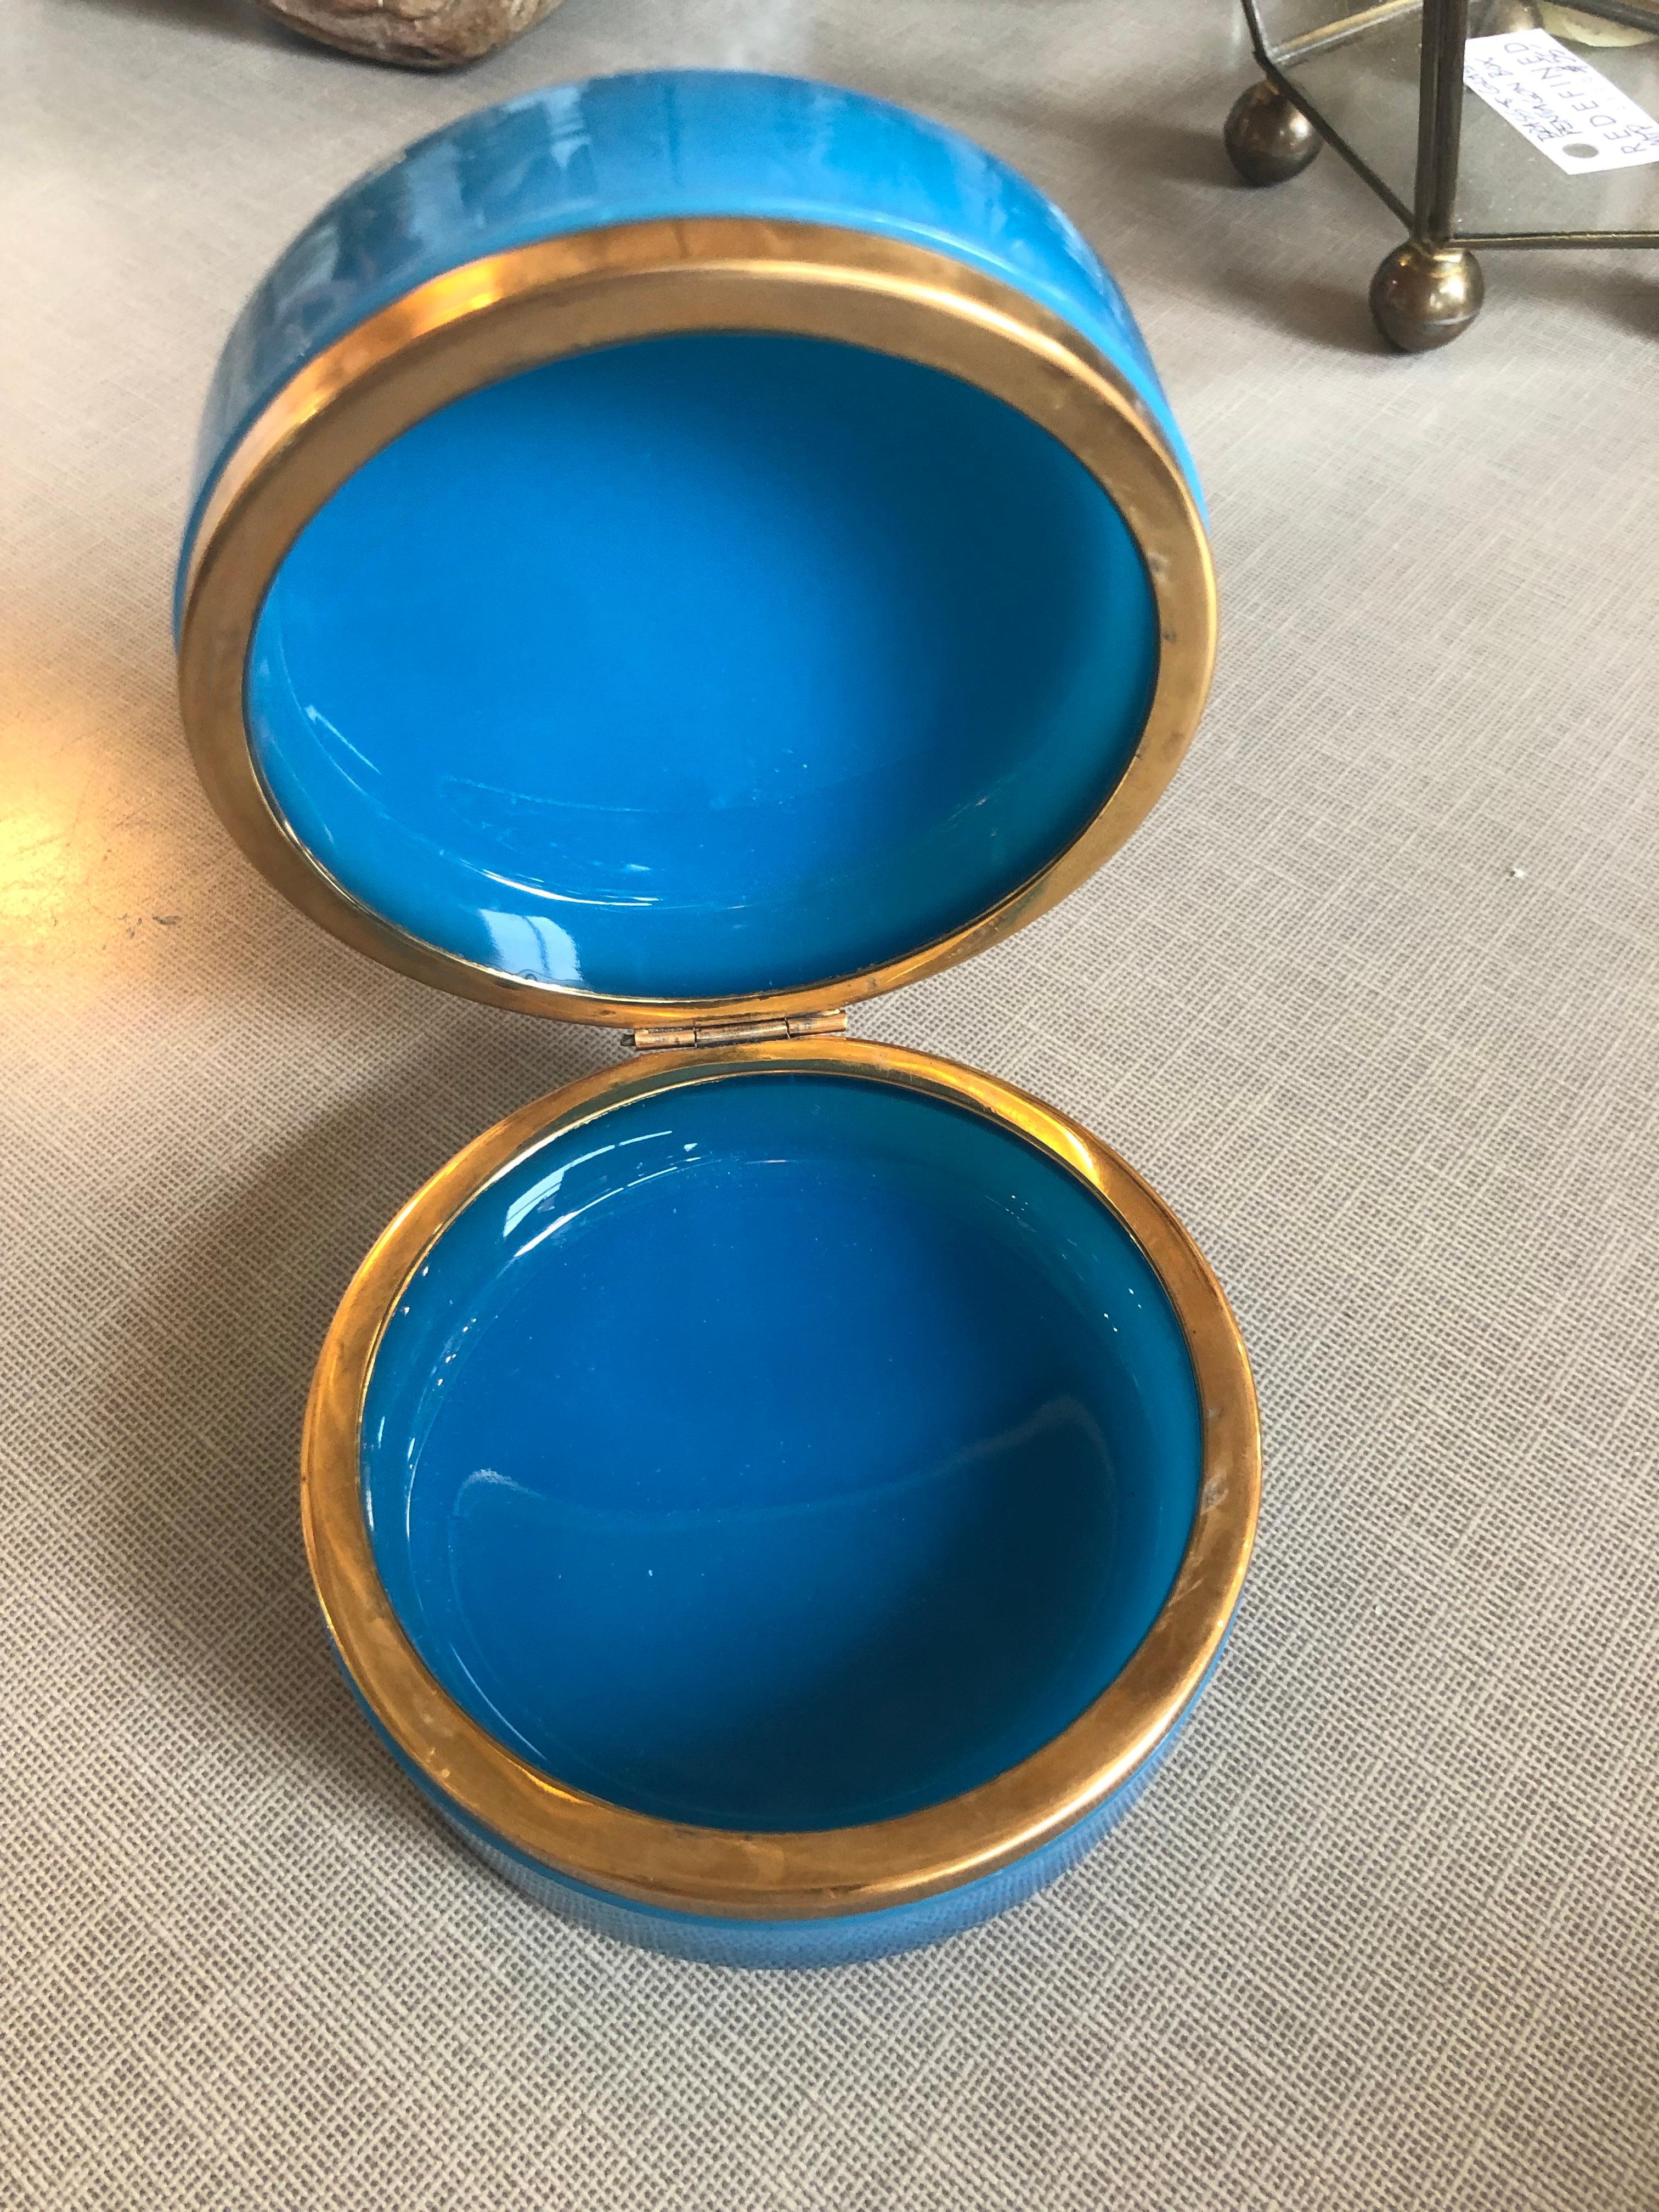 An antique French blue round opaline glass casket or box having a hinged doré bronze banding.